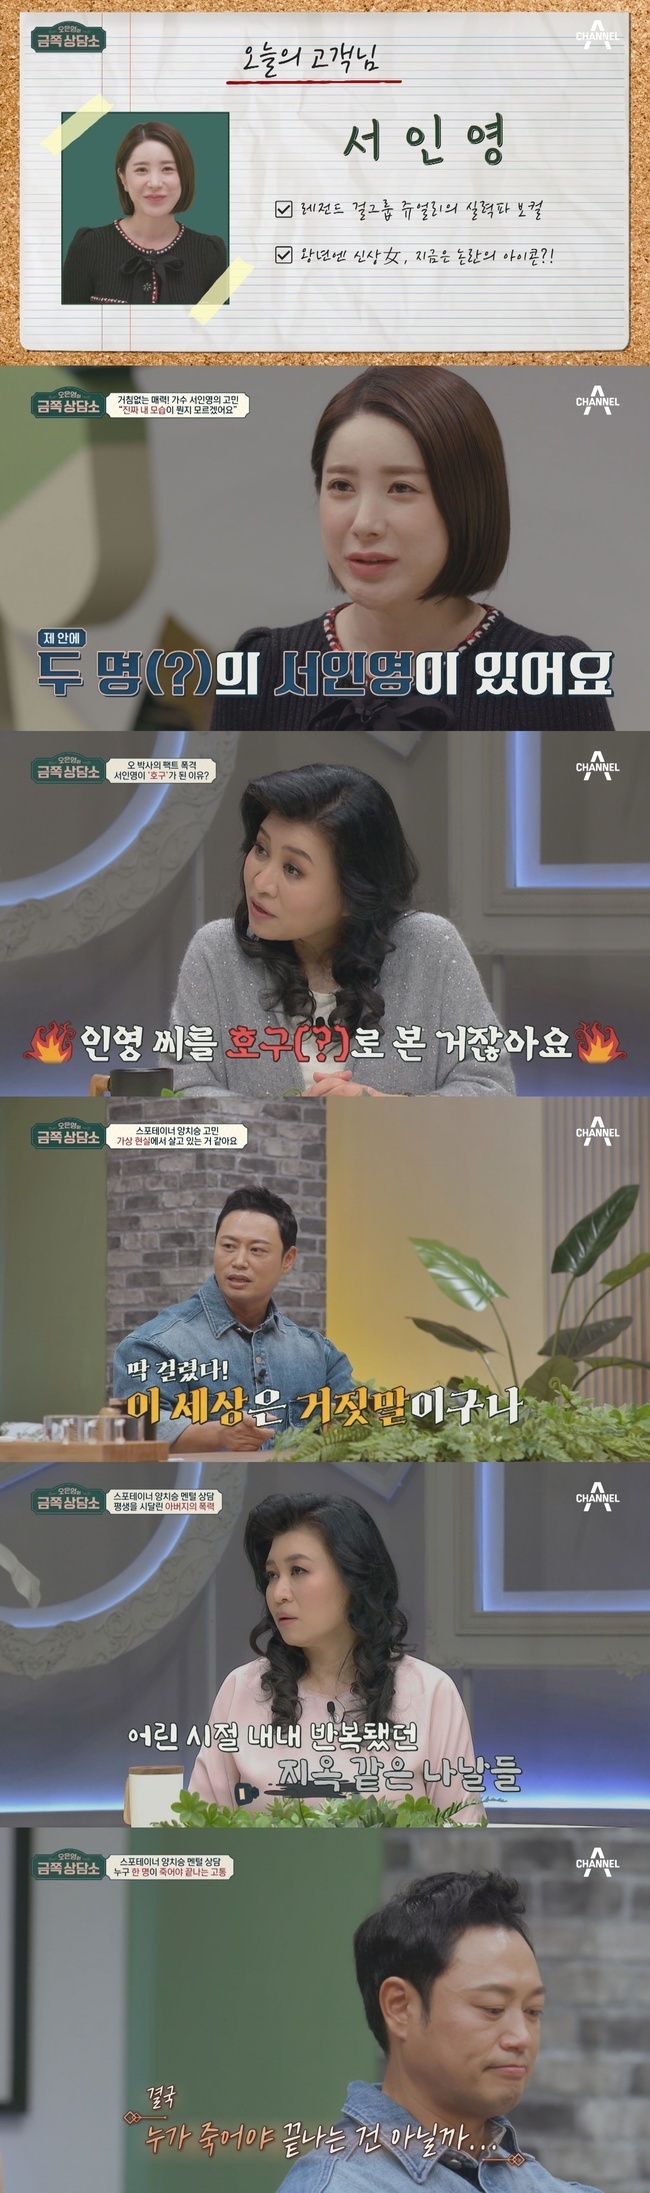 Oh Eun Young advises for Seo In-young and Yang Chi-seongChannel A Oh Eun-youngs Gold Counseling Center, scheduled to air at 9:30 pm on November 12, reveals the troubles of Singer Seo In-young and superstar trainer Yang Chi-seong, who are famous for their character, the entertainment industry Sen Character.The first customer to appear first was Singer Seo In-young, a 20-year-old singer who became a solo singer in the 2000s issue maker and group jewelry.After looking at the counseling center after deliberation, Seo In-young showed a nervousness after meeting Oh Eun Young Doctorate for the first time, saying, It feels like being judged somehow and I think I should be honest about my inner feelings.I am so different when I am alone in the broadcast, he tells me of his long agony, and he is misunderstood and has been hard to blame.Oh Eun Young Doctorate is sincerely comforting the unexpected Confessions of Seo In-young, who seemed to be proud, and continues to consult on various aspects from the growth process of Seo In-young to the Friend relationship, saying, If you buy Miunderstood, you should find out why.I lent a luxury bag to my close friends and told them an anecdote that I did not get back, and I did not even have a friend to drink coffee with successive betrayal.Oh Eun Young Doctorate, who listened to the story, said that he was surprised by the reversal diagnosis that the problem is hiding from Seo In-young.In addition, he tells the story of his escape at dawn in his childhood and hit Mother with high heels, and he confises his sincerity for his family and tears his handmade people.Attention is focused on the appearance of real Seo In-young hidden behind Sen Sister, and what is the prickly advice and comfort of Oh Eun Young Doctorate for her.The following customers are Yang Chi-seong trainers who created the bodies of numerous stars such as BTS Jin, Actor Kim Woo-bin and Actor Sung Hoon.He said that the imagination of the world that lives now is not real made the counseling center freeze with Confessions.However, Oh Eun Young Doctorate pinpoints that this unrealism can be expressed until adulthood if exposed to extreme violent situations in childhood.What was the weight of life that Yang Chi-seong, who seemed only to be a steel mentalist, had swallowed alone for a long time?Eunyoung Magic, a limited express that will touch the heart of the wounded adult Yang Chi-seong, will be unveiled.